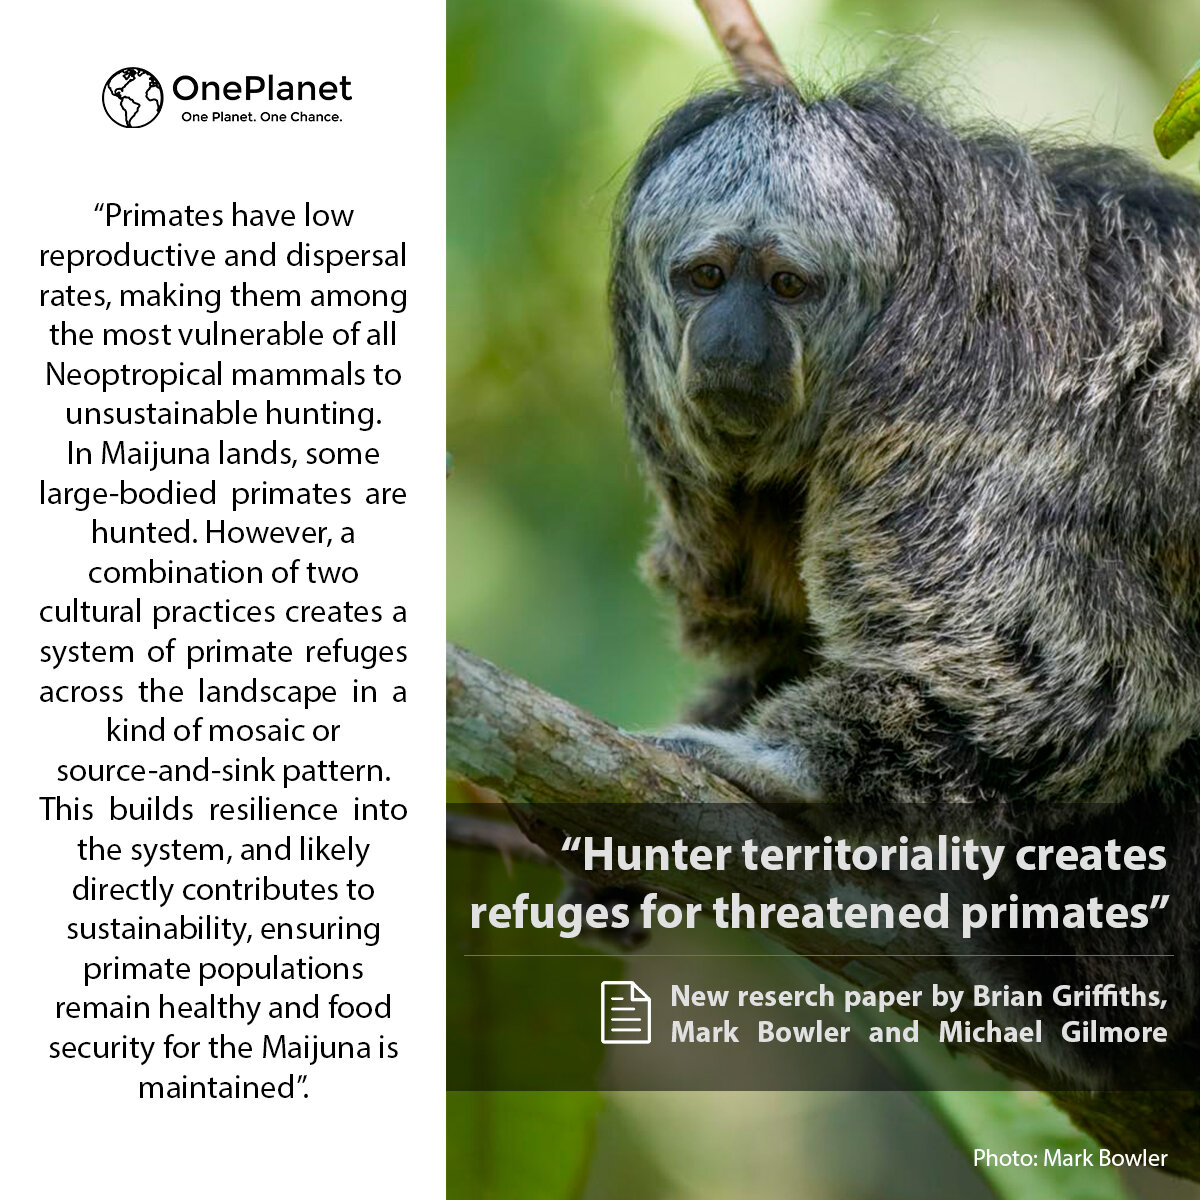 New primate paper! 🐒
Check out the publication by Brian Griffiths, Mark Bowler and Michael Gilmore in the international journal Environmental Conservation that explores how Maijuna hunting practices conserve threatened primates in Loreto, Peru, crea